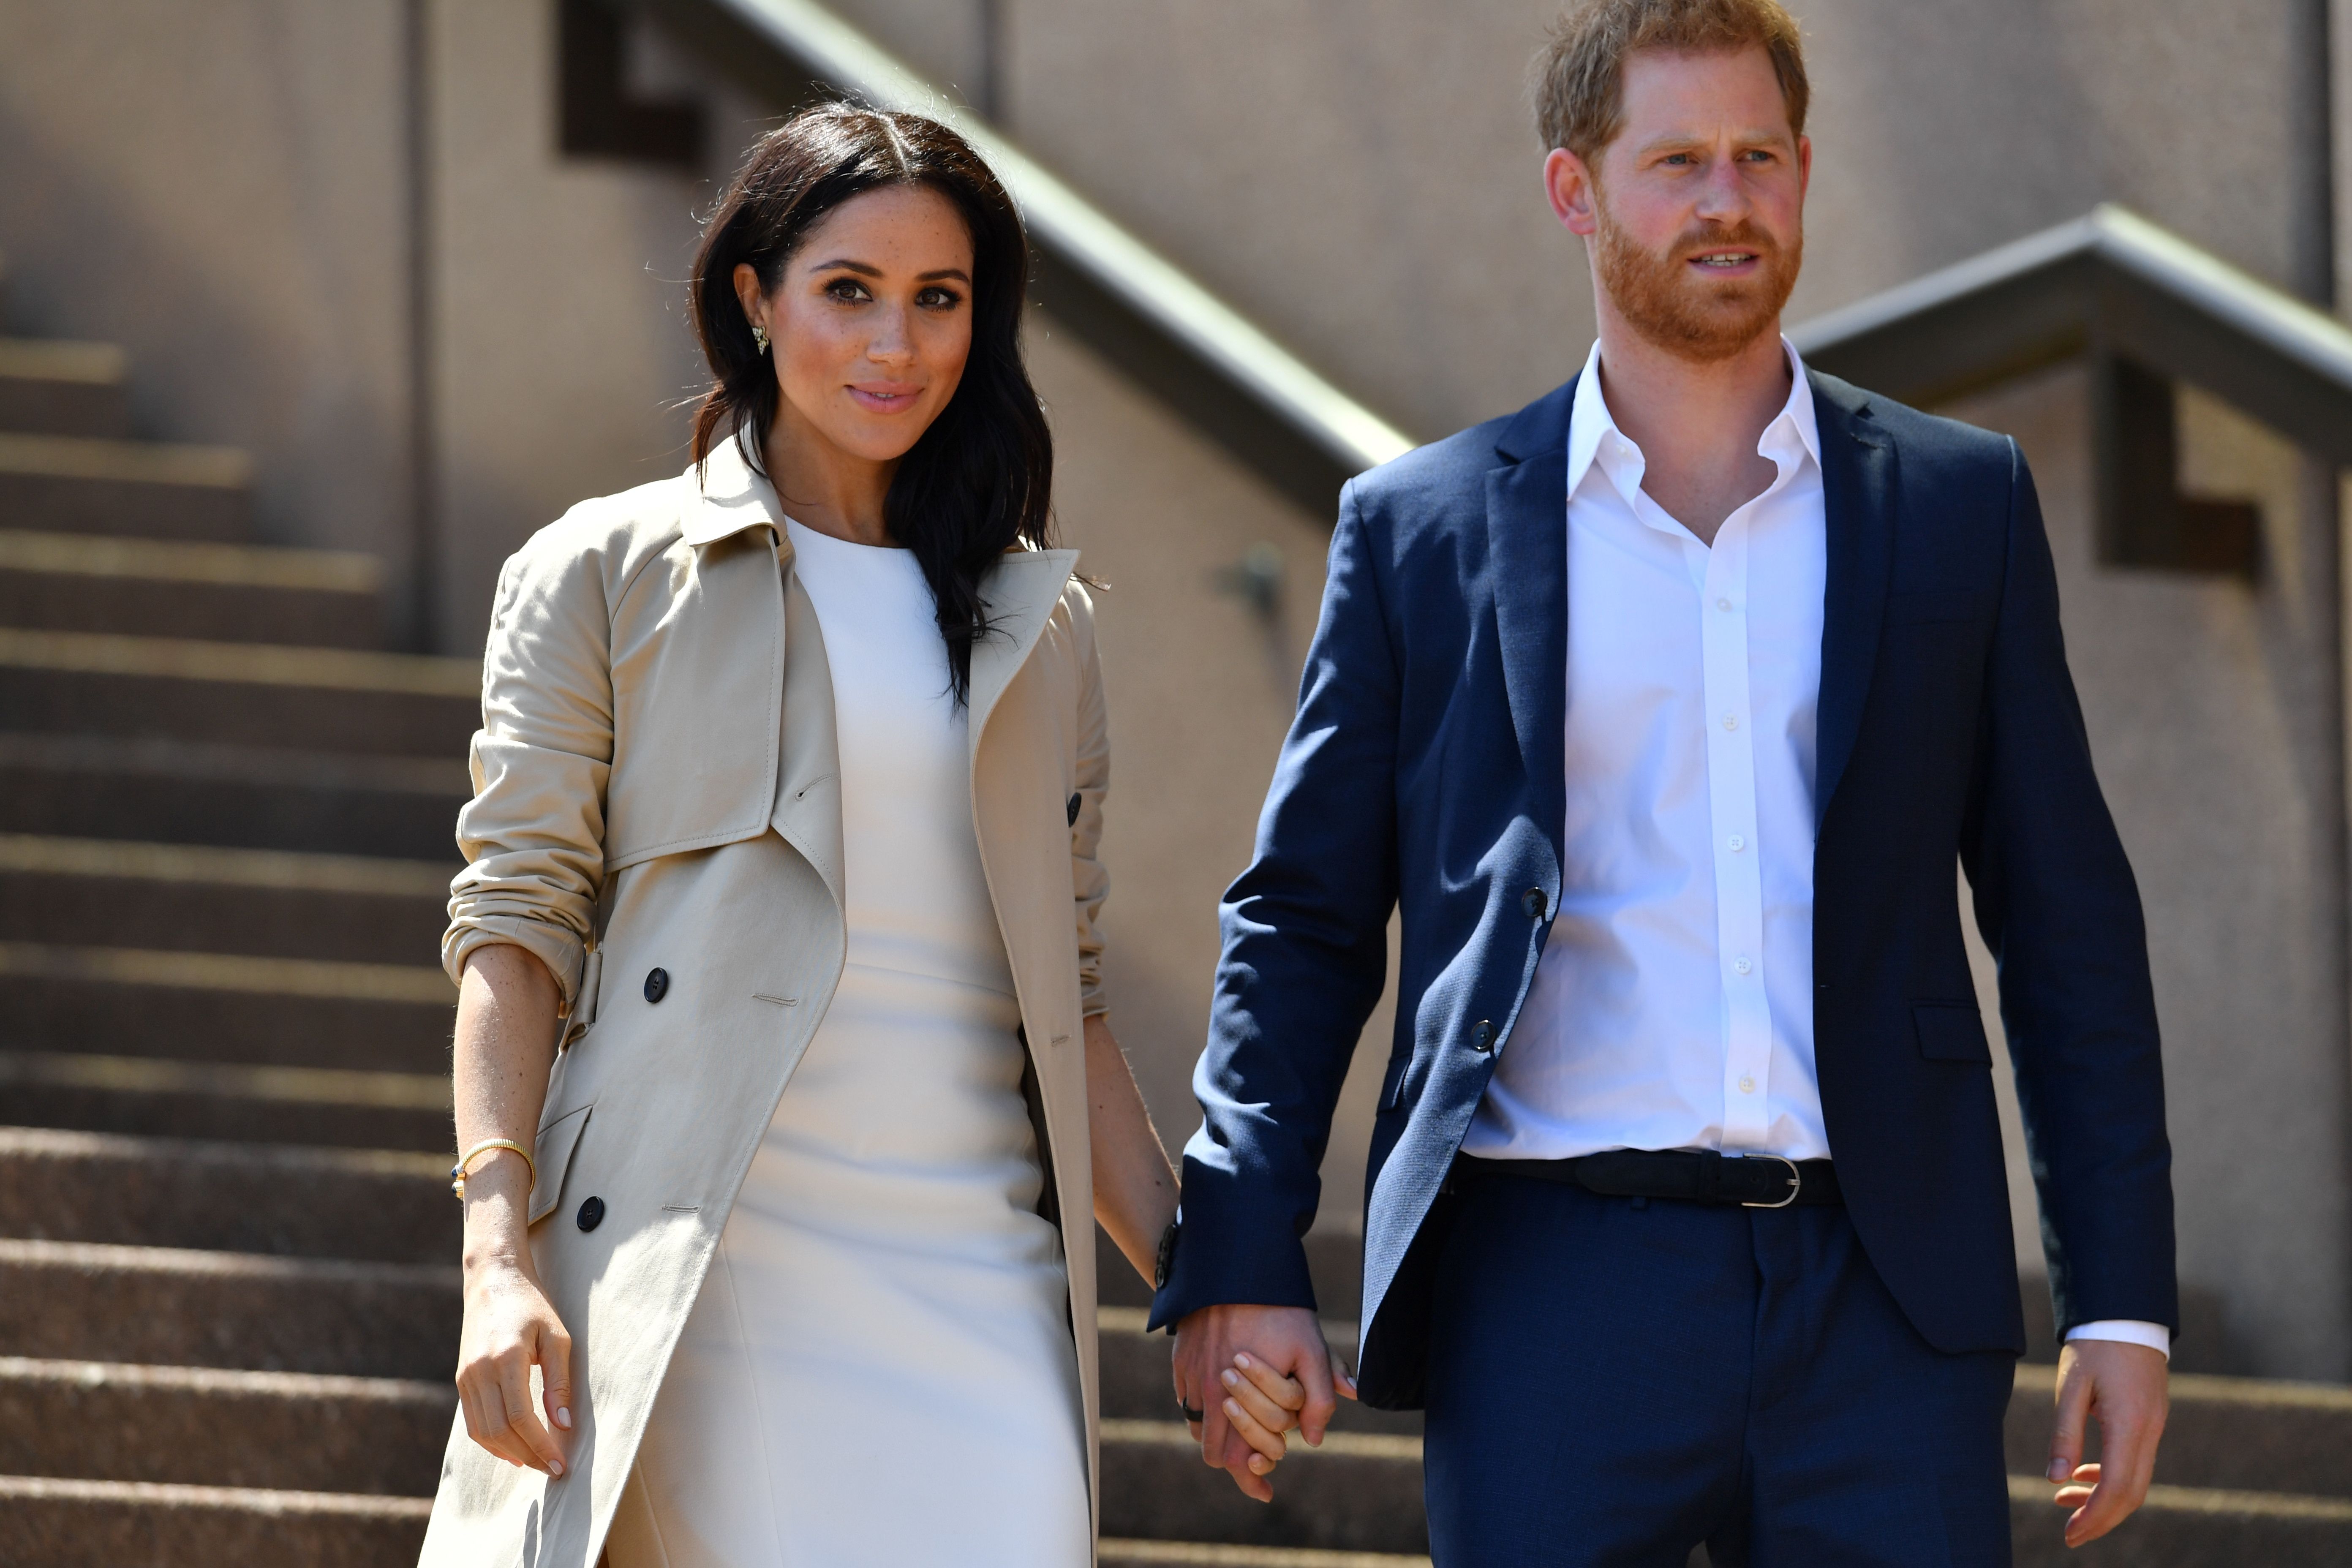 Prince Harry and Meghan Markle walking down the stairs of Sydney's Opera House